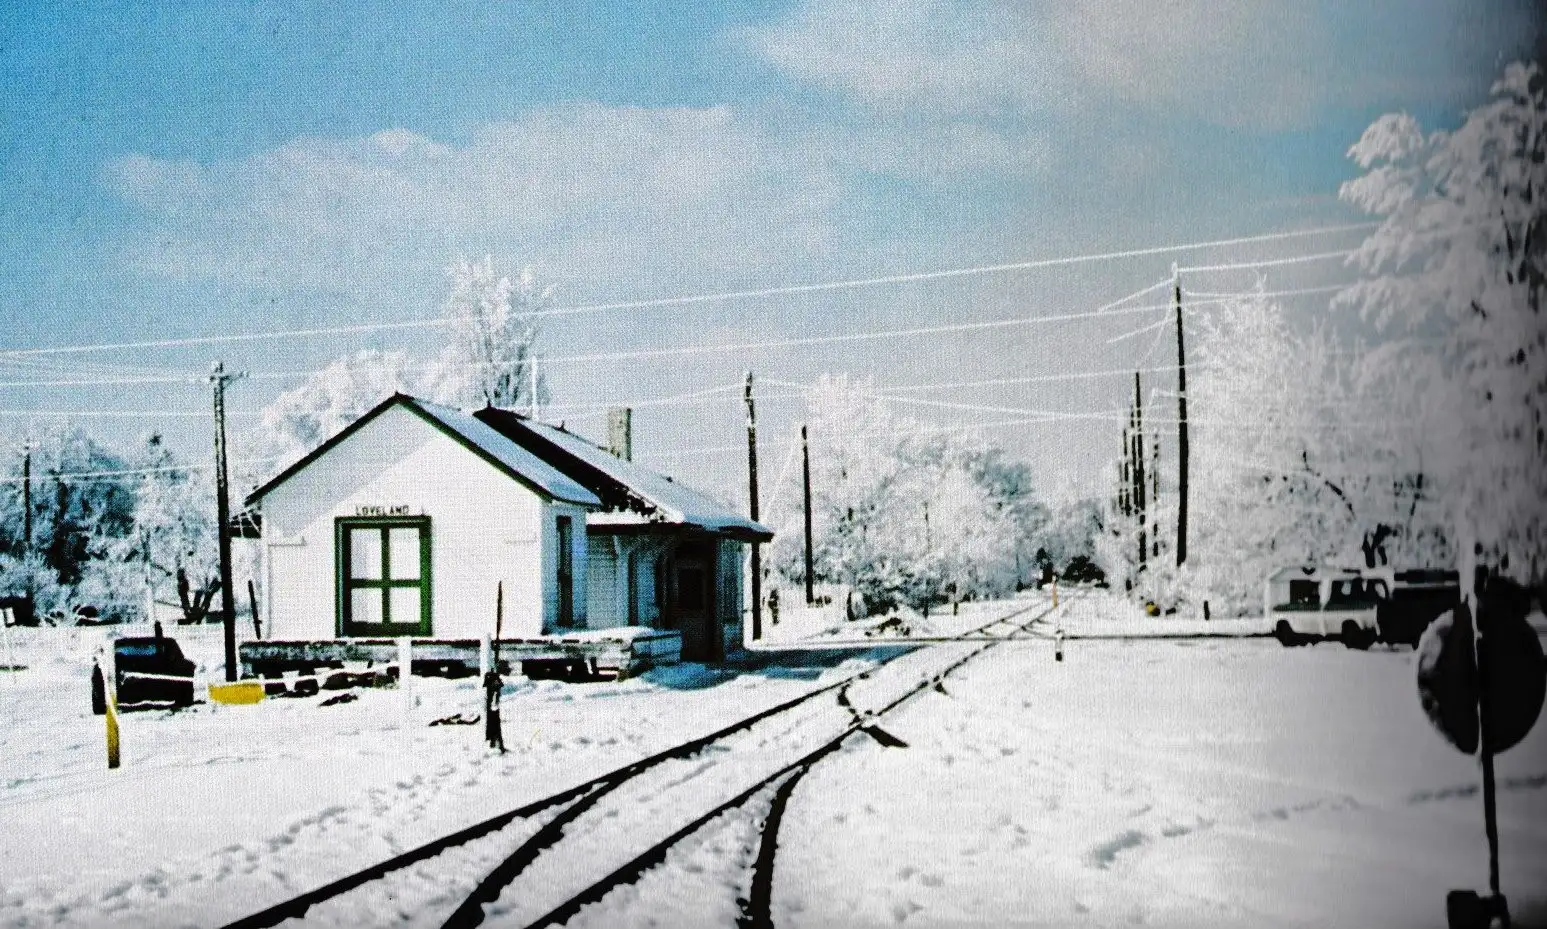 Photo of white train depot building next to train tracks, snow on the ground and in the trees